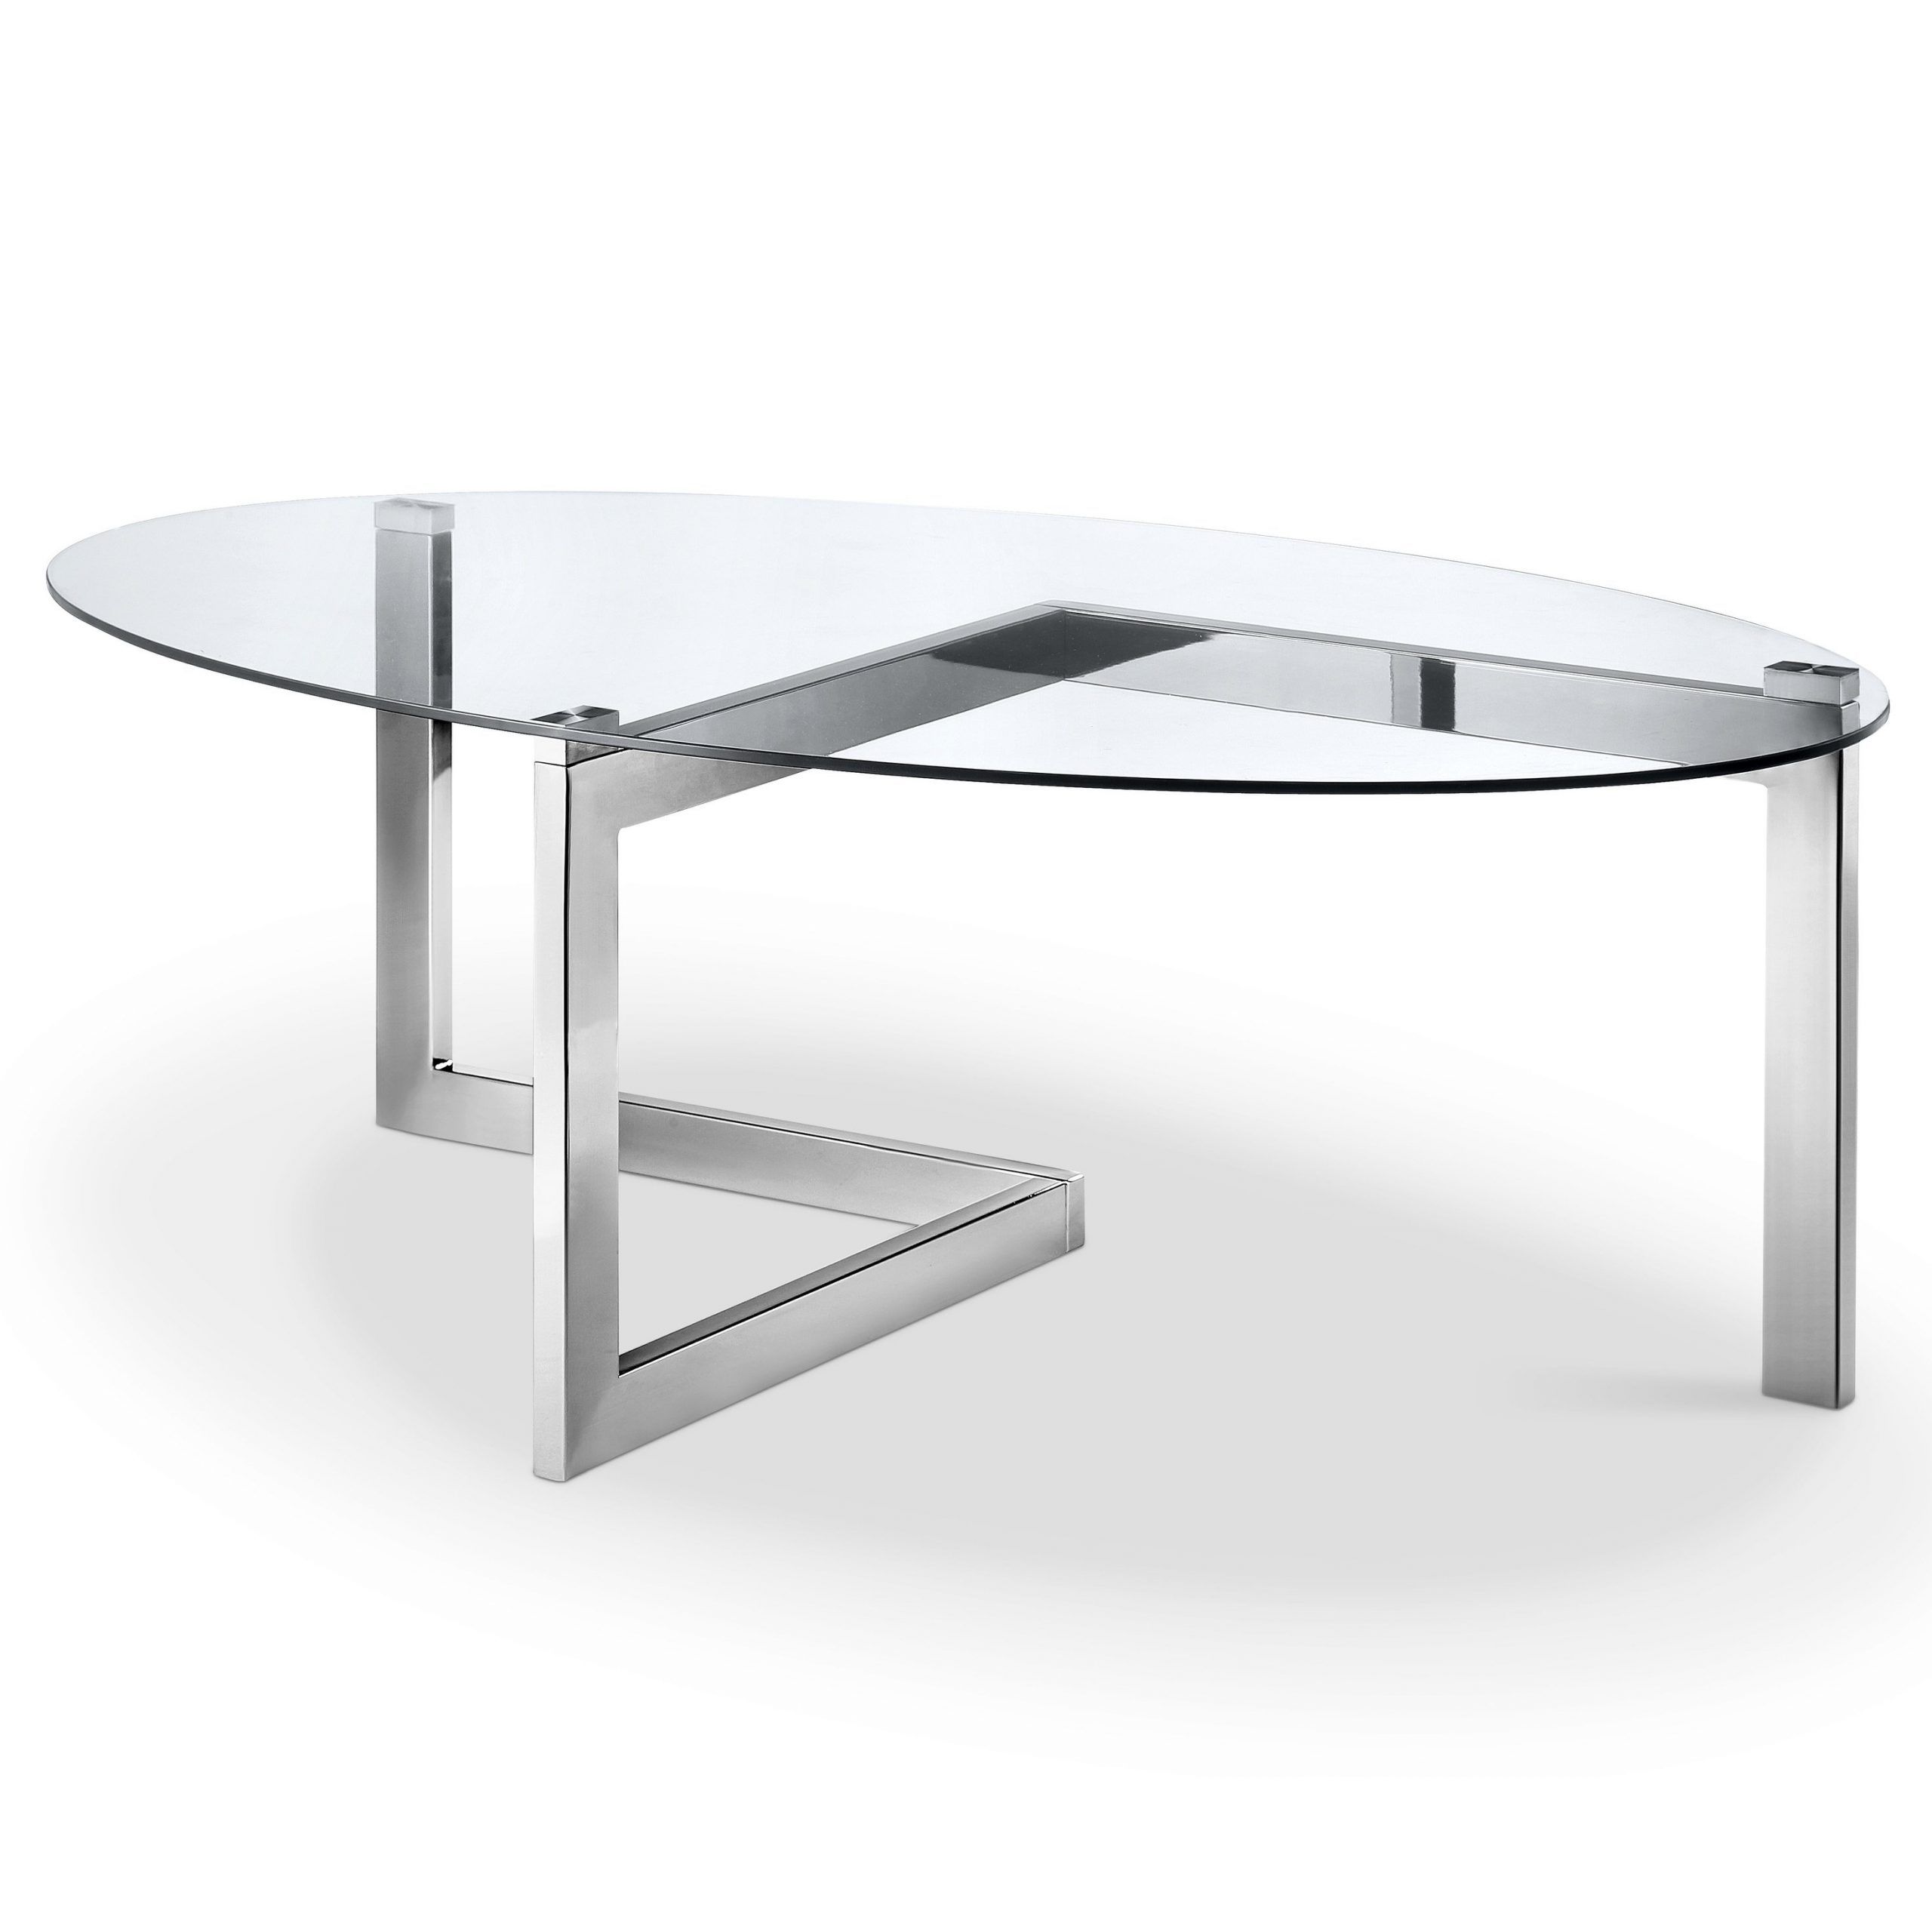 Most Recent Aries Modern Chrome And Glass Top Oval Cocktail Table Throughout Chrome And Glass Modern Coffee Tables (View 2 of 20)